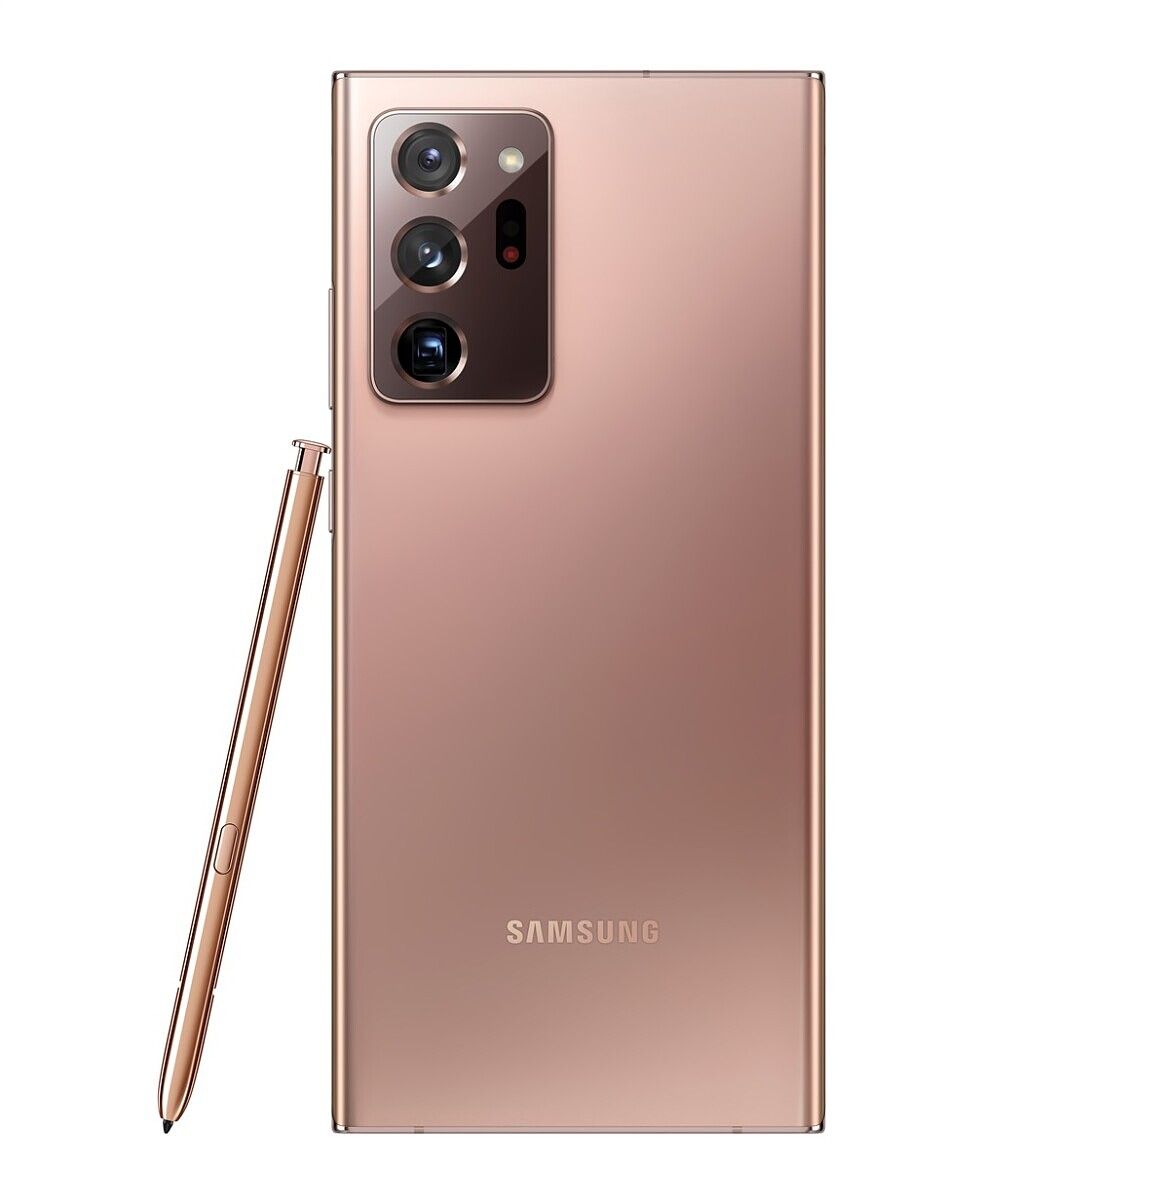 The Galaxy Note 20 Ultra is one of the last Note series devices with Samsung that comes with a large display and an S Pen.